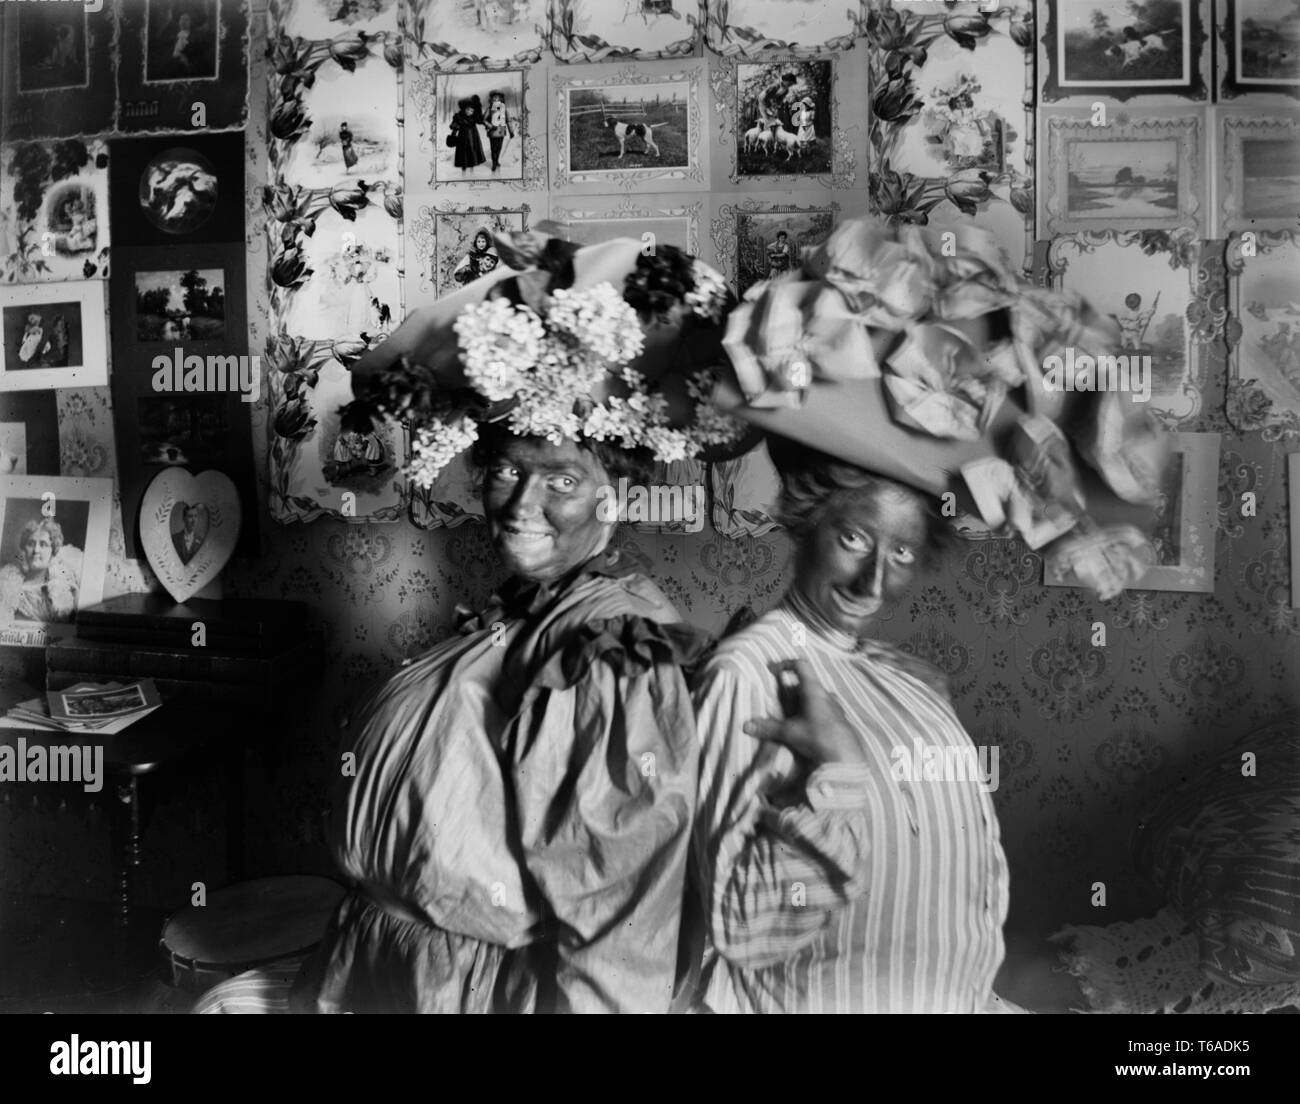 Two Victorian woman in blackface wearing large flowered hats playfully sit back to back, ca. 1900. Stock Photo